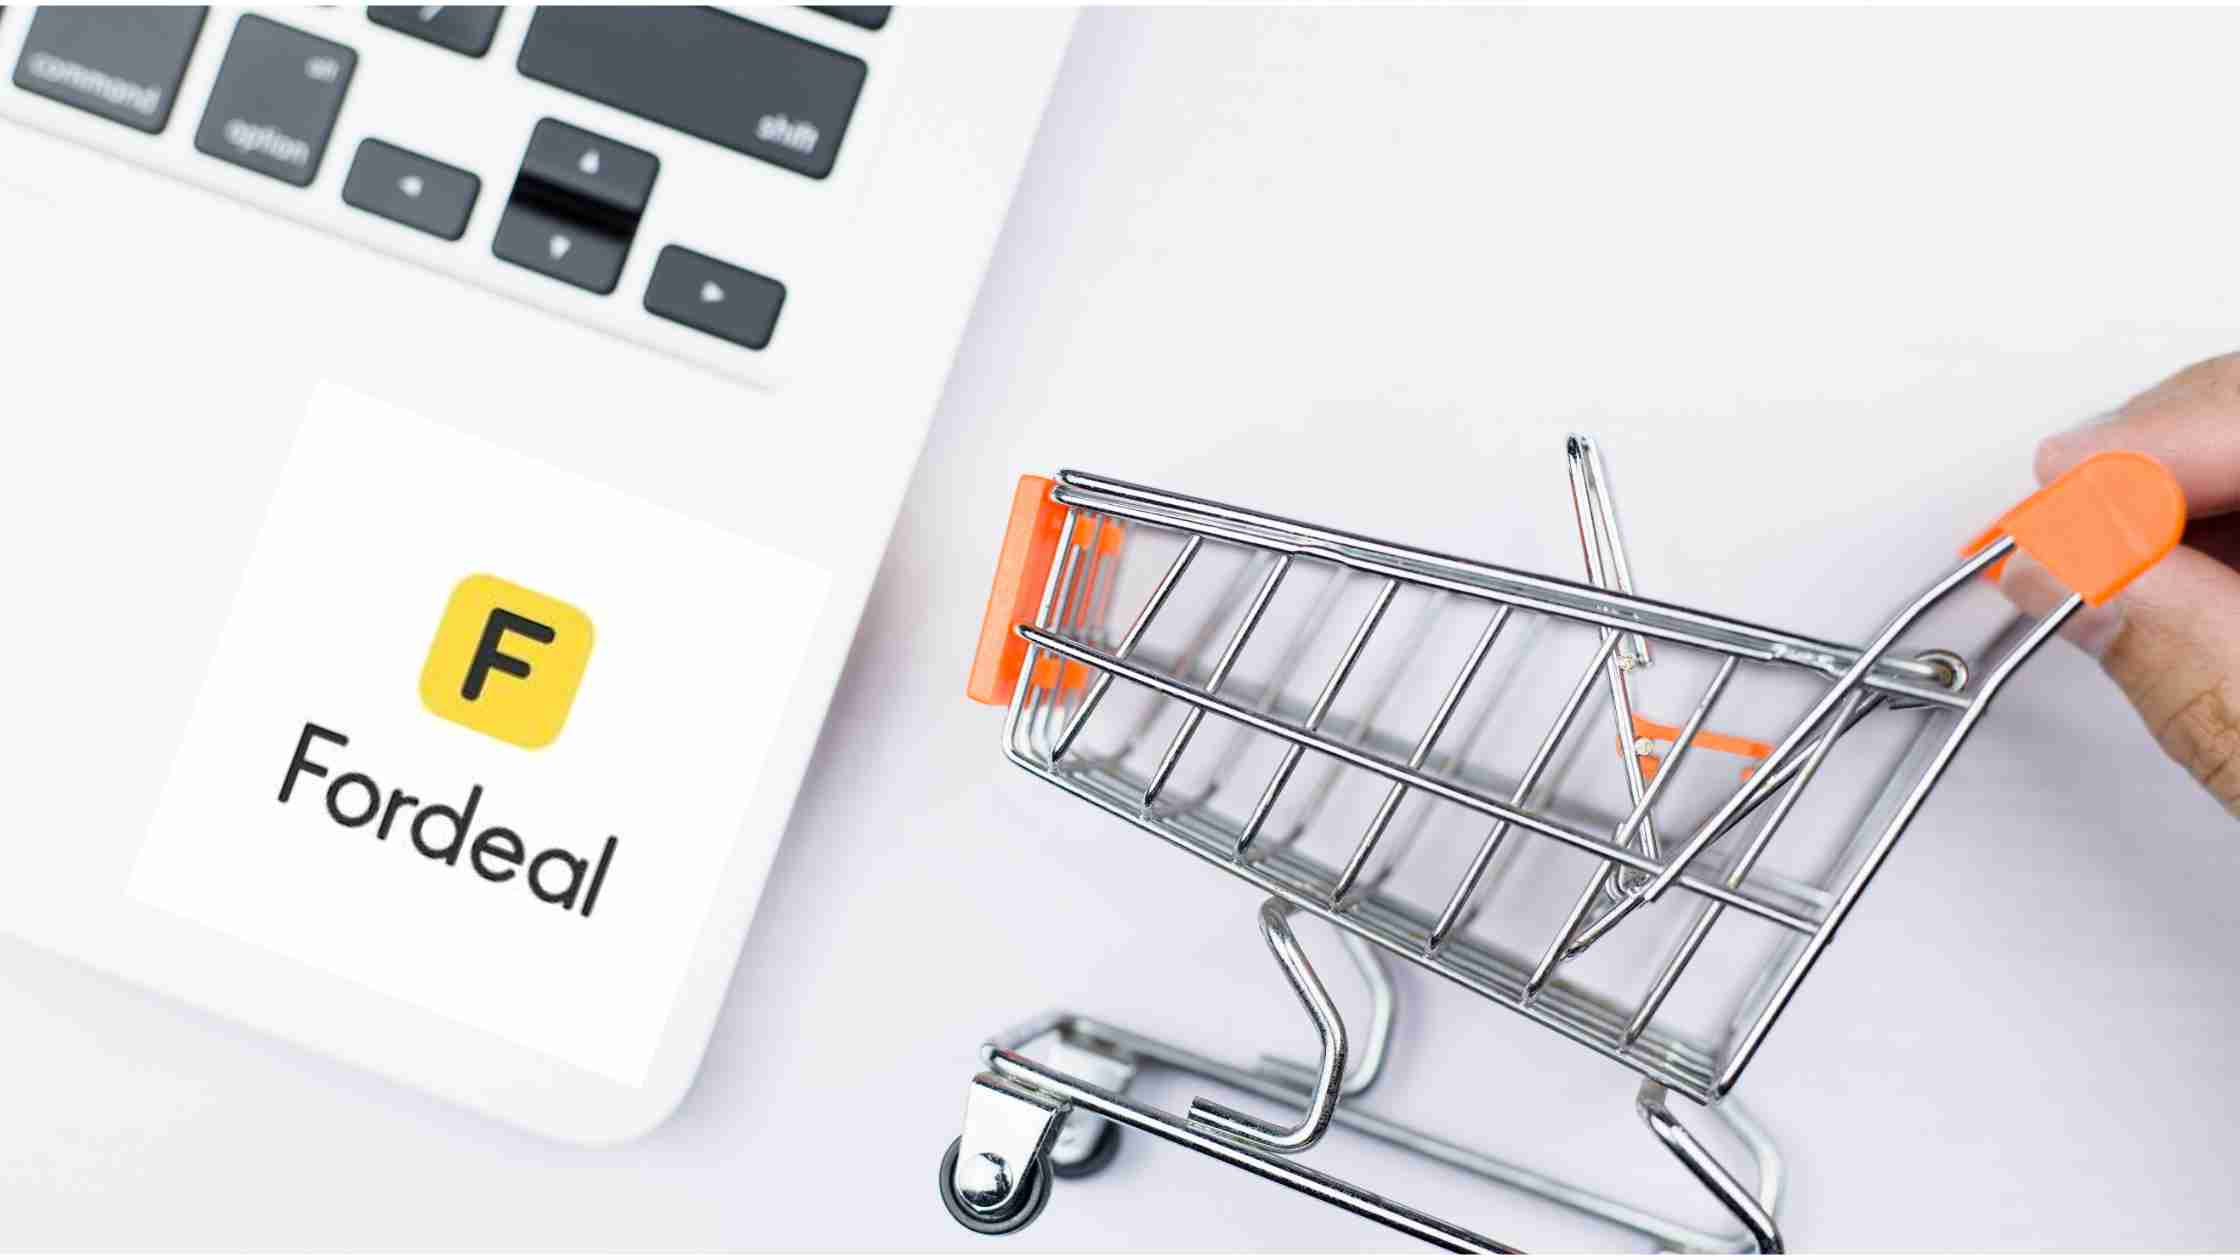 Fordeal: Here’s what you need to know about the Middle Eastern shopping platform